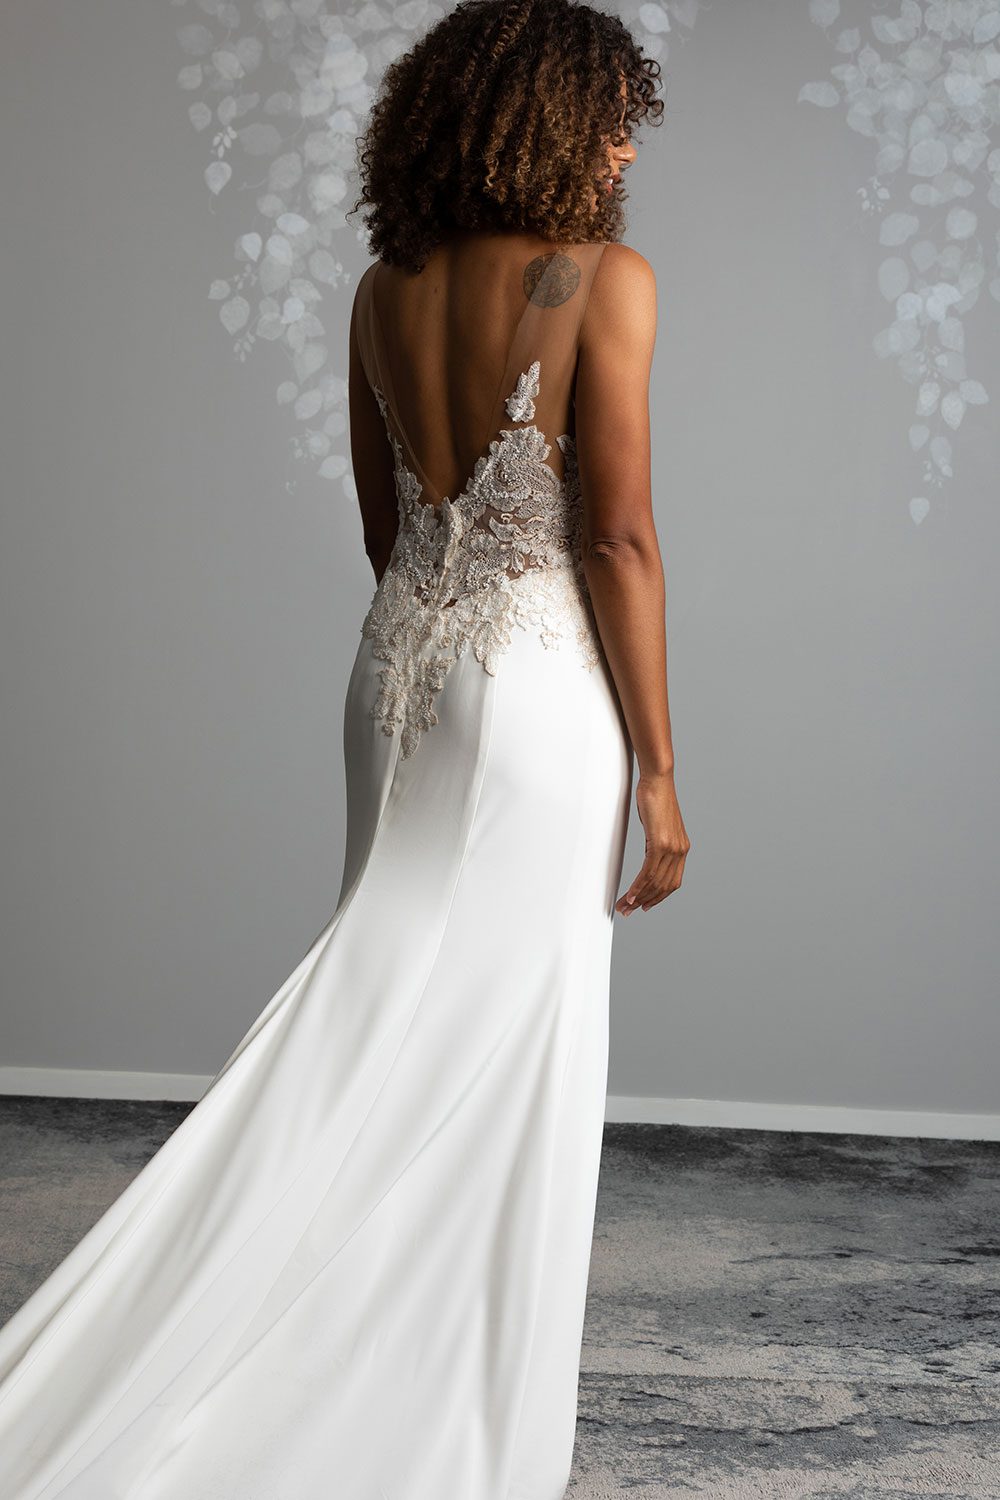 Samantha Wedding Dress from Vinka Design. This beautiful wedding dress has a nude sheer illusion strapless neckline made from fine Italian tulle. Low sheer back & structured bodice, & soft crepe train. Back view of model showing low sheer back and bridal crepe train